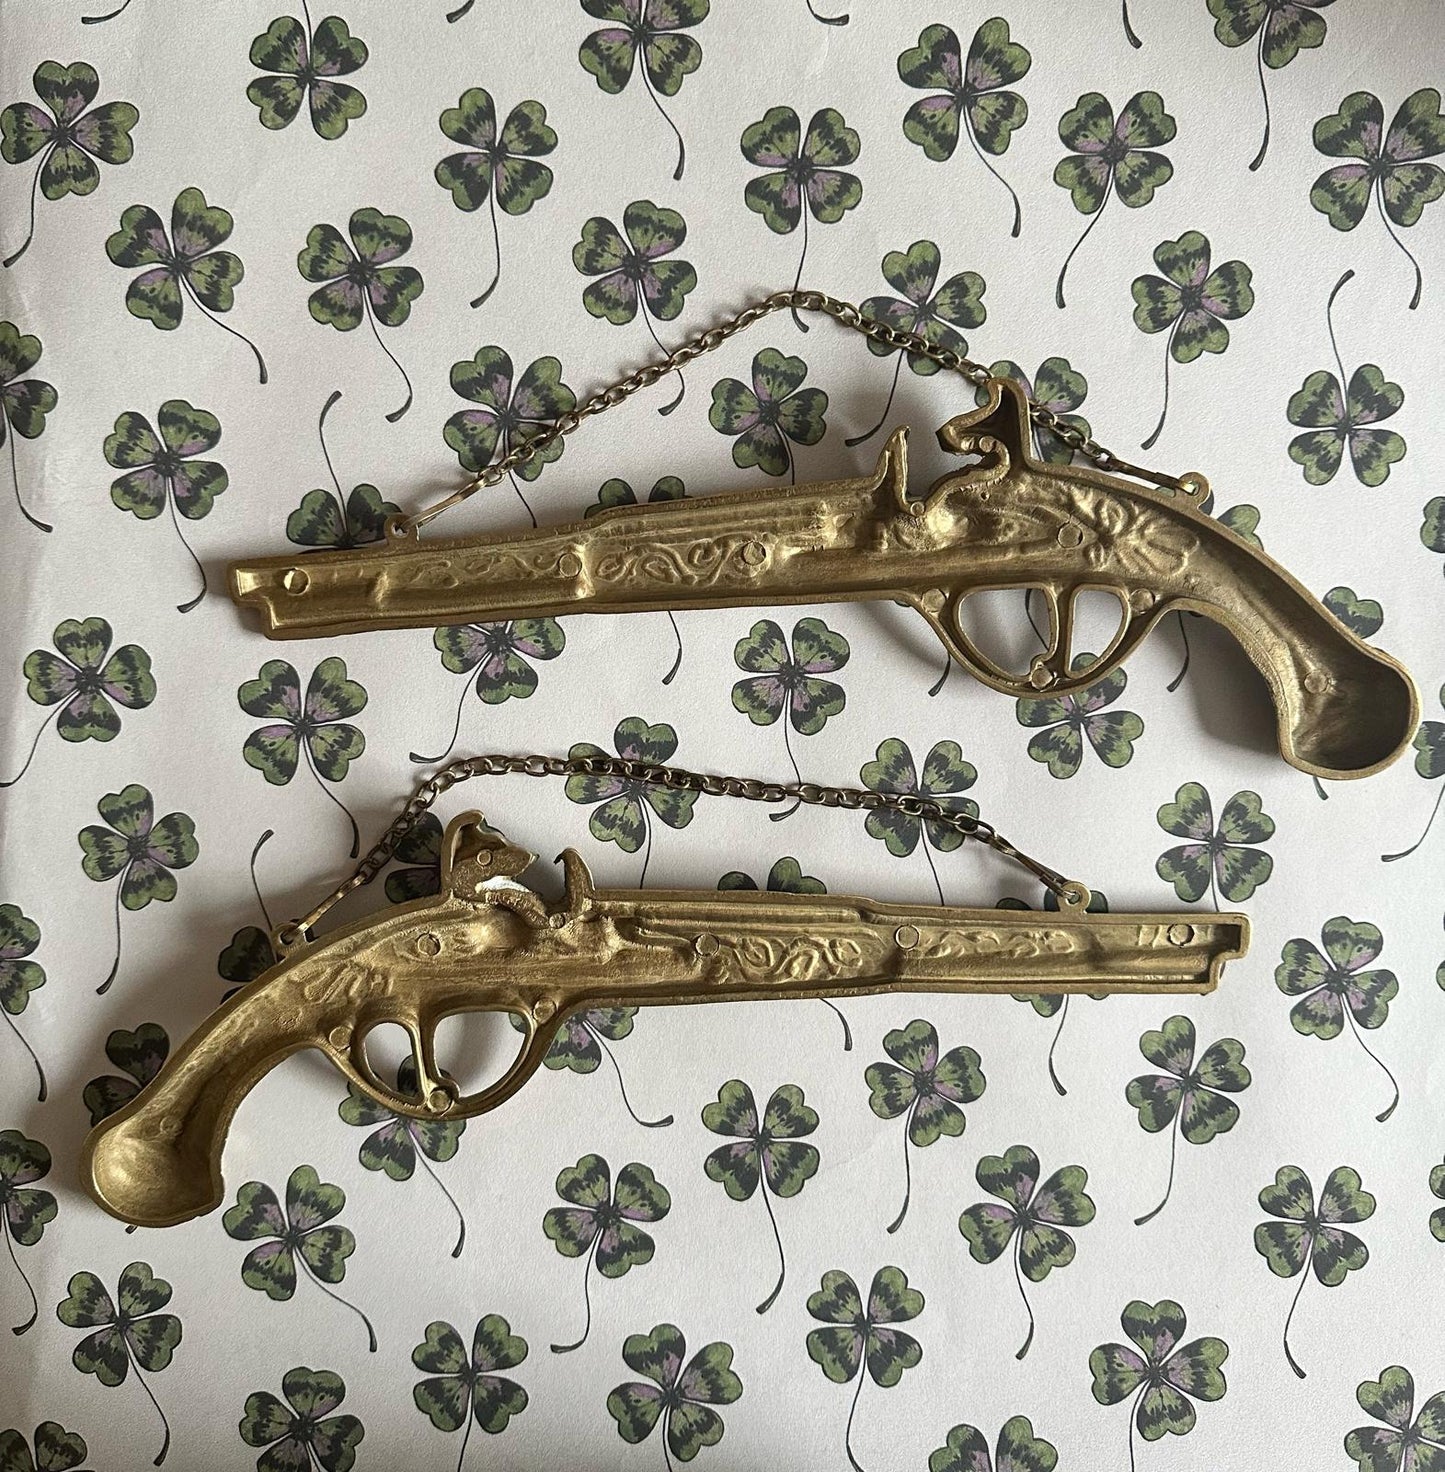 A cool Pair of Brass Pistol (with hanging chain) - FLORA BLACK